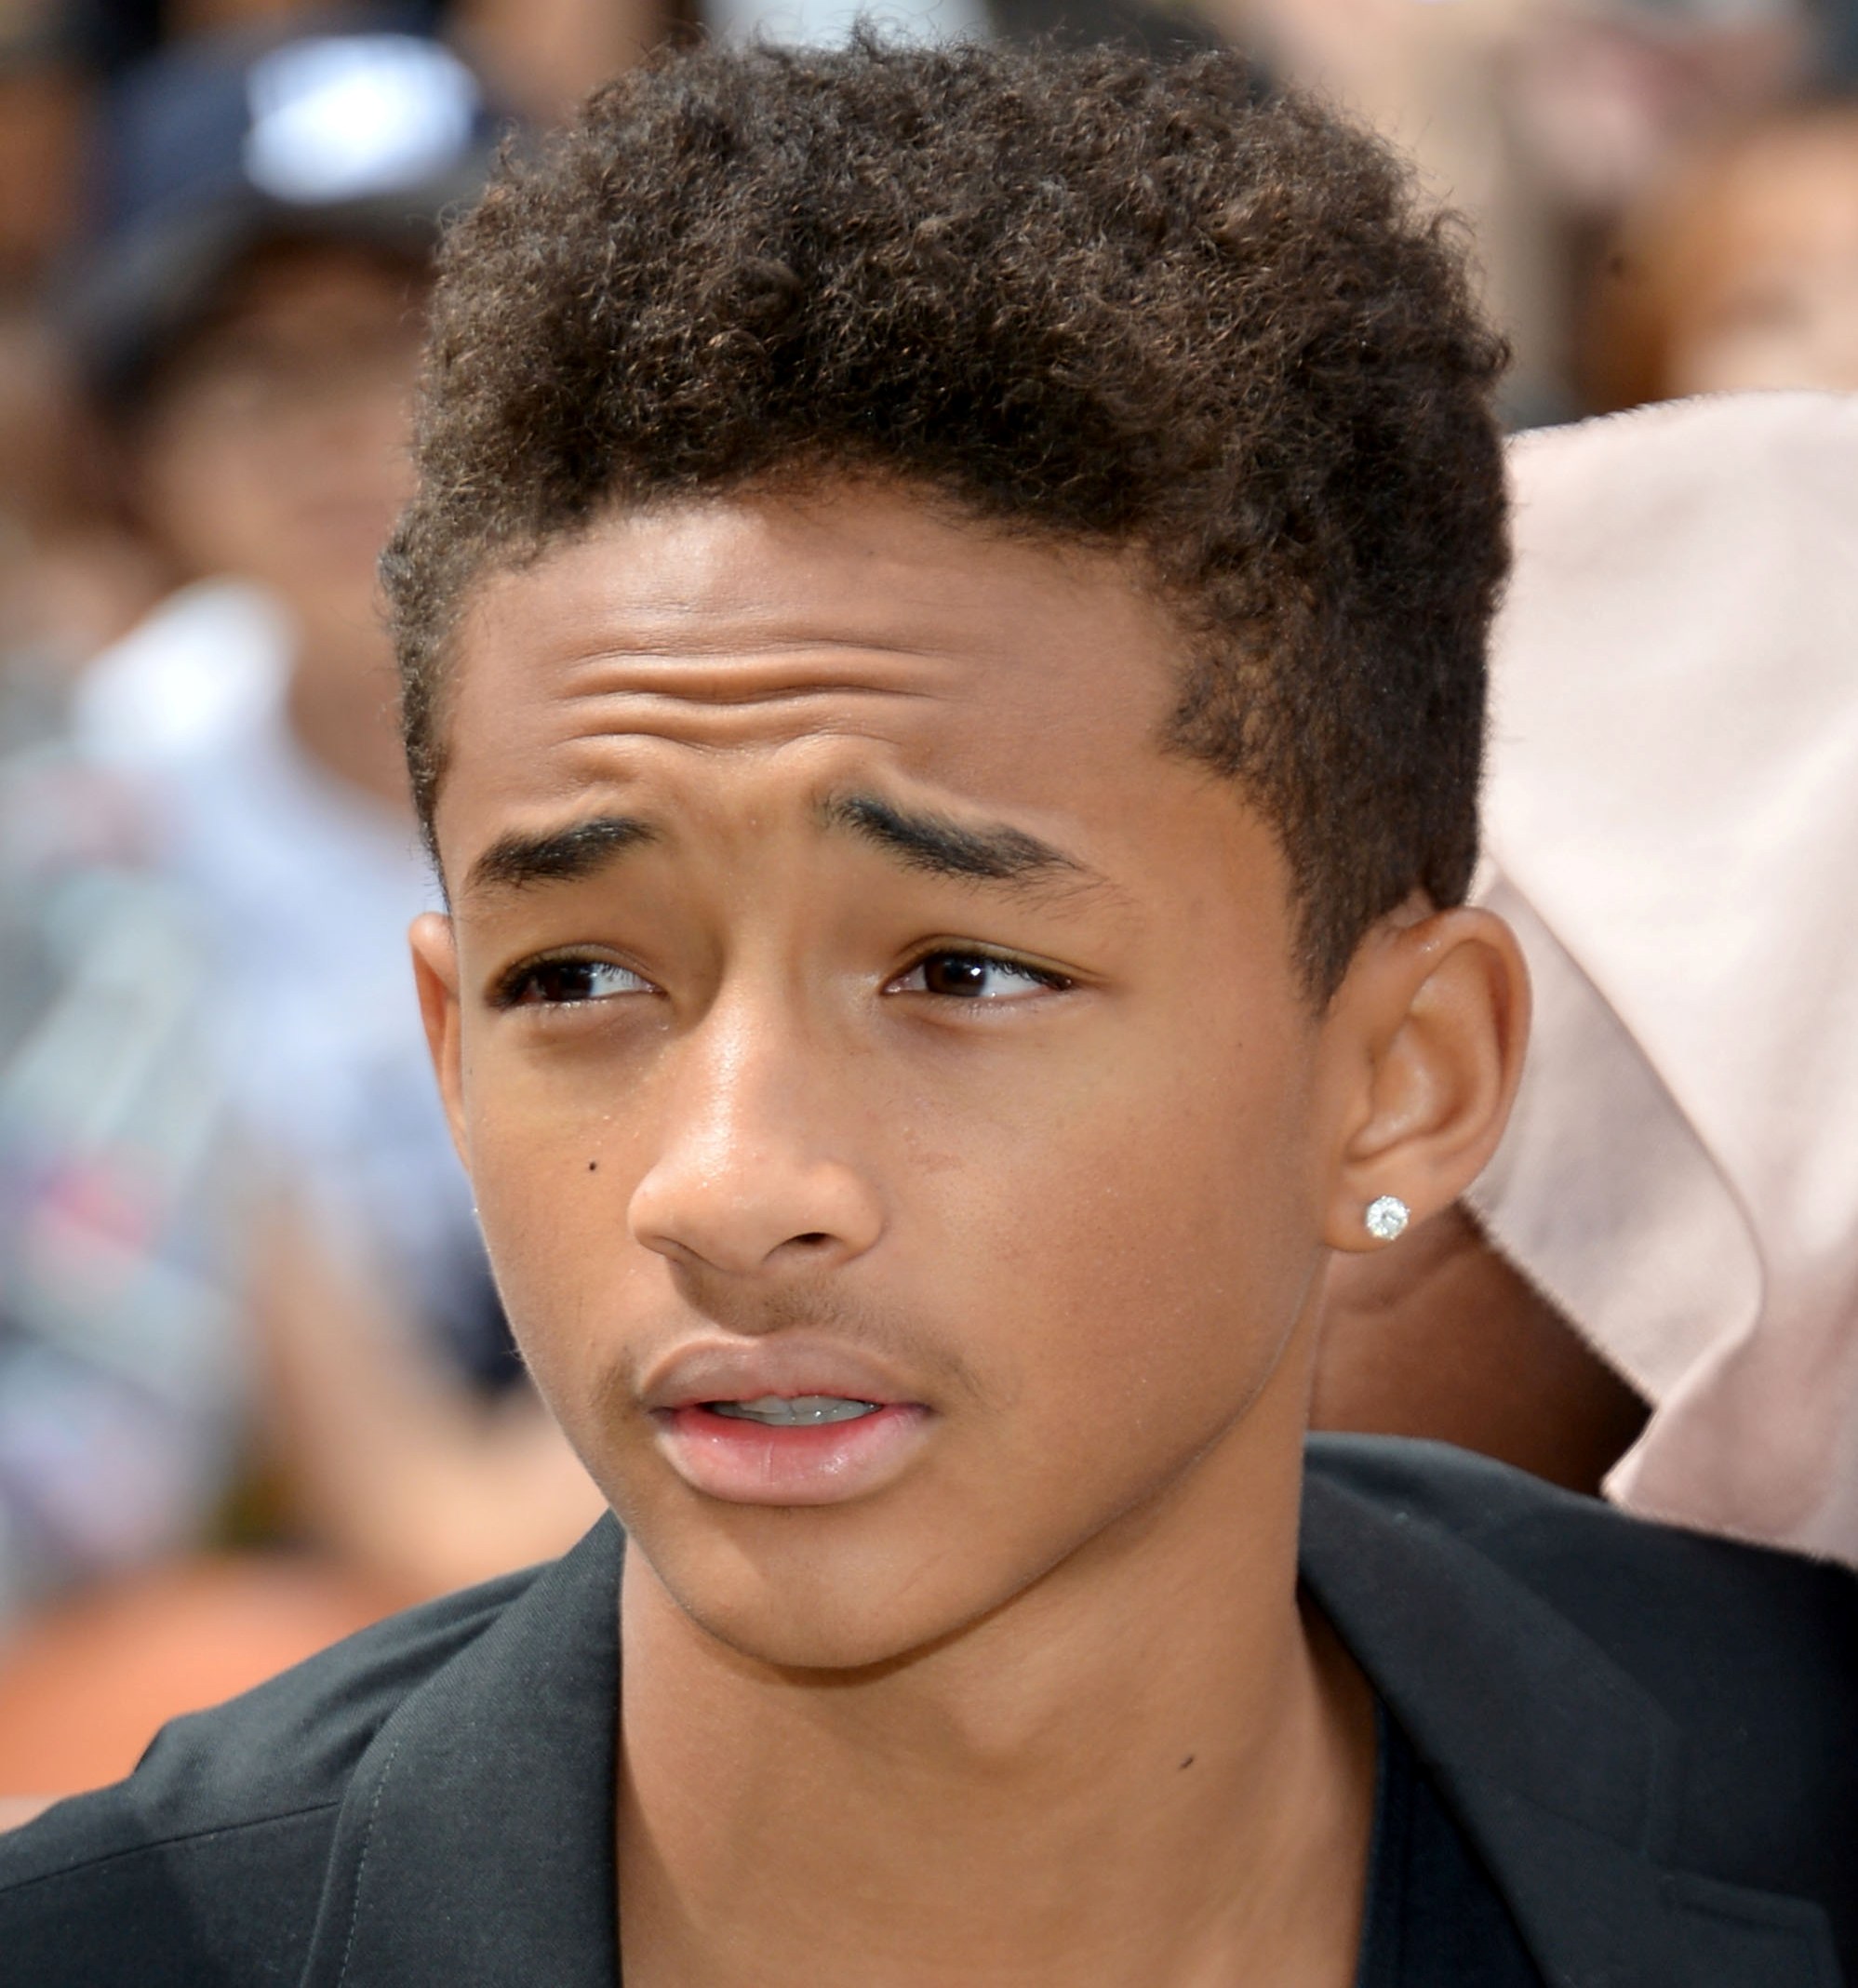 Jaden Smith Reveals How Much Weight Hes Gained Since Doctor Told Him About  His Nutritional Deficiencies Photo 4682131  Jada Pinkett Smith Jaden  Smith Willow Smith Photos  Just Jared Entertainment News